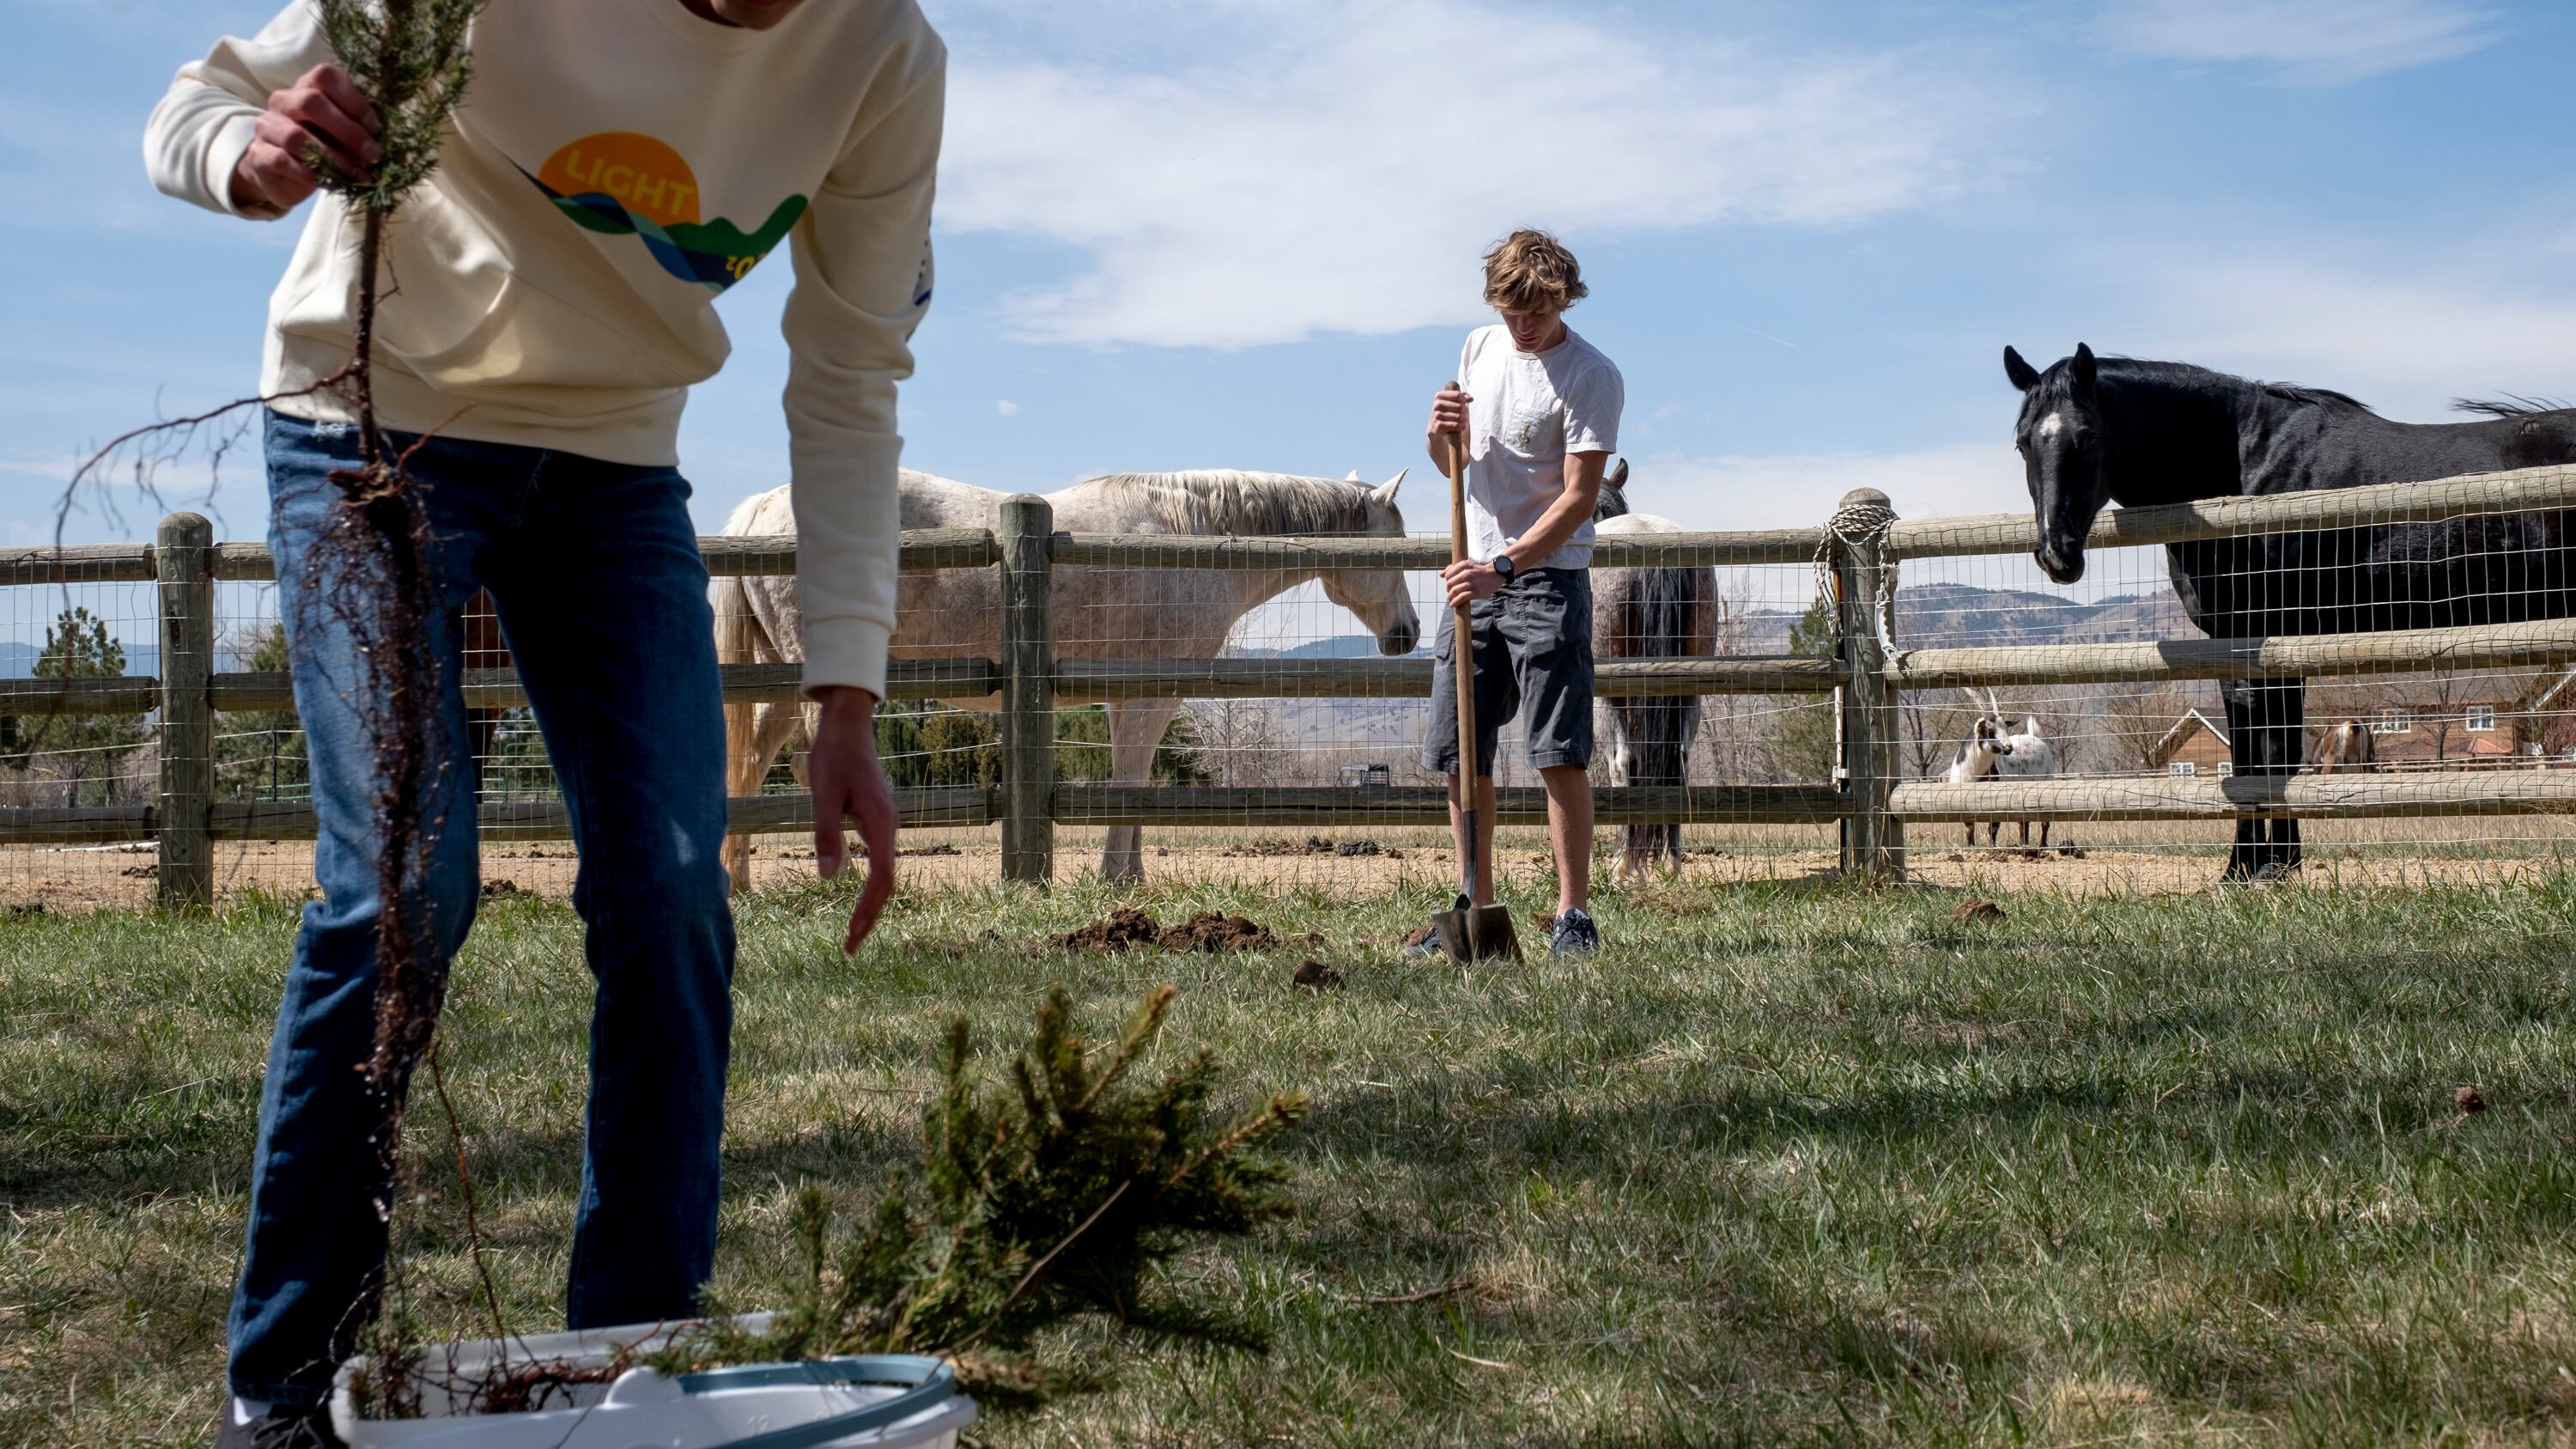 Two high school students plant trees in a field as horses look on from behind a wooden fence.